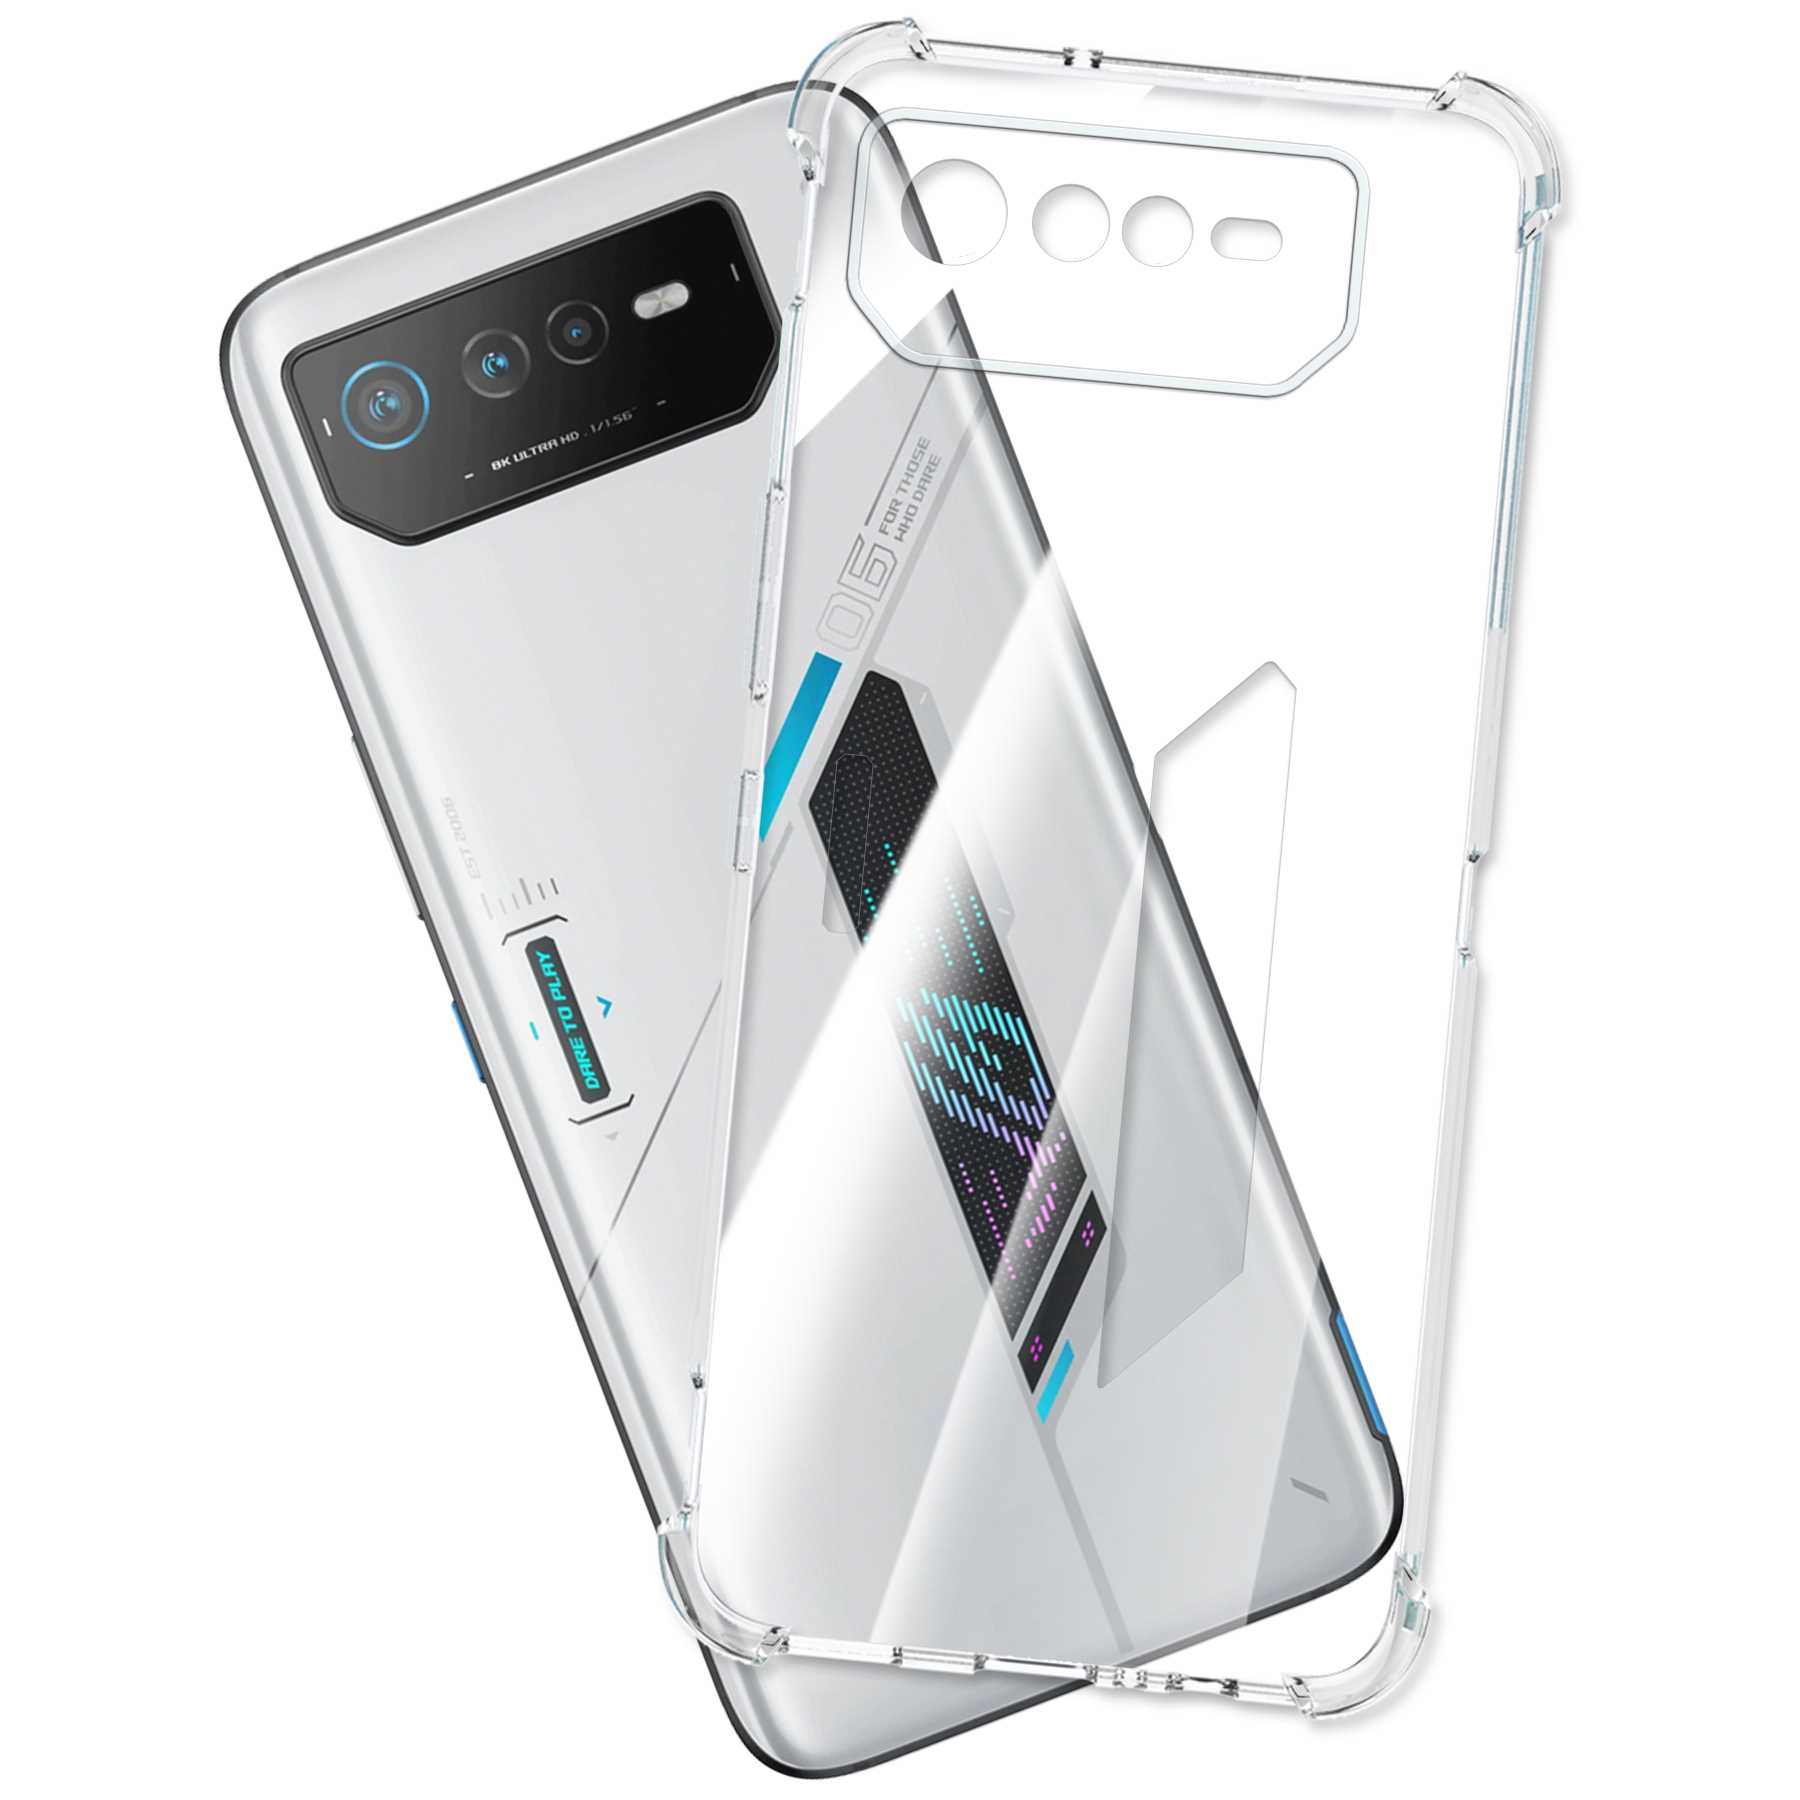 6D, 6, ENERGY ROG Clear Backcover, MTB MORE Transparent Case, Phone Asus, Armor